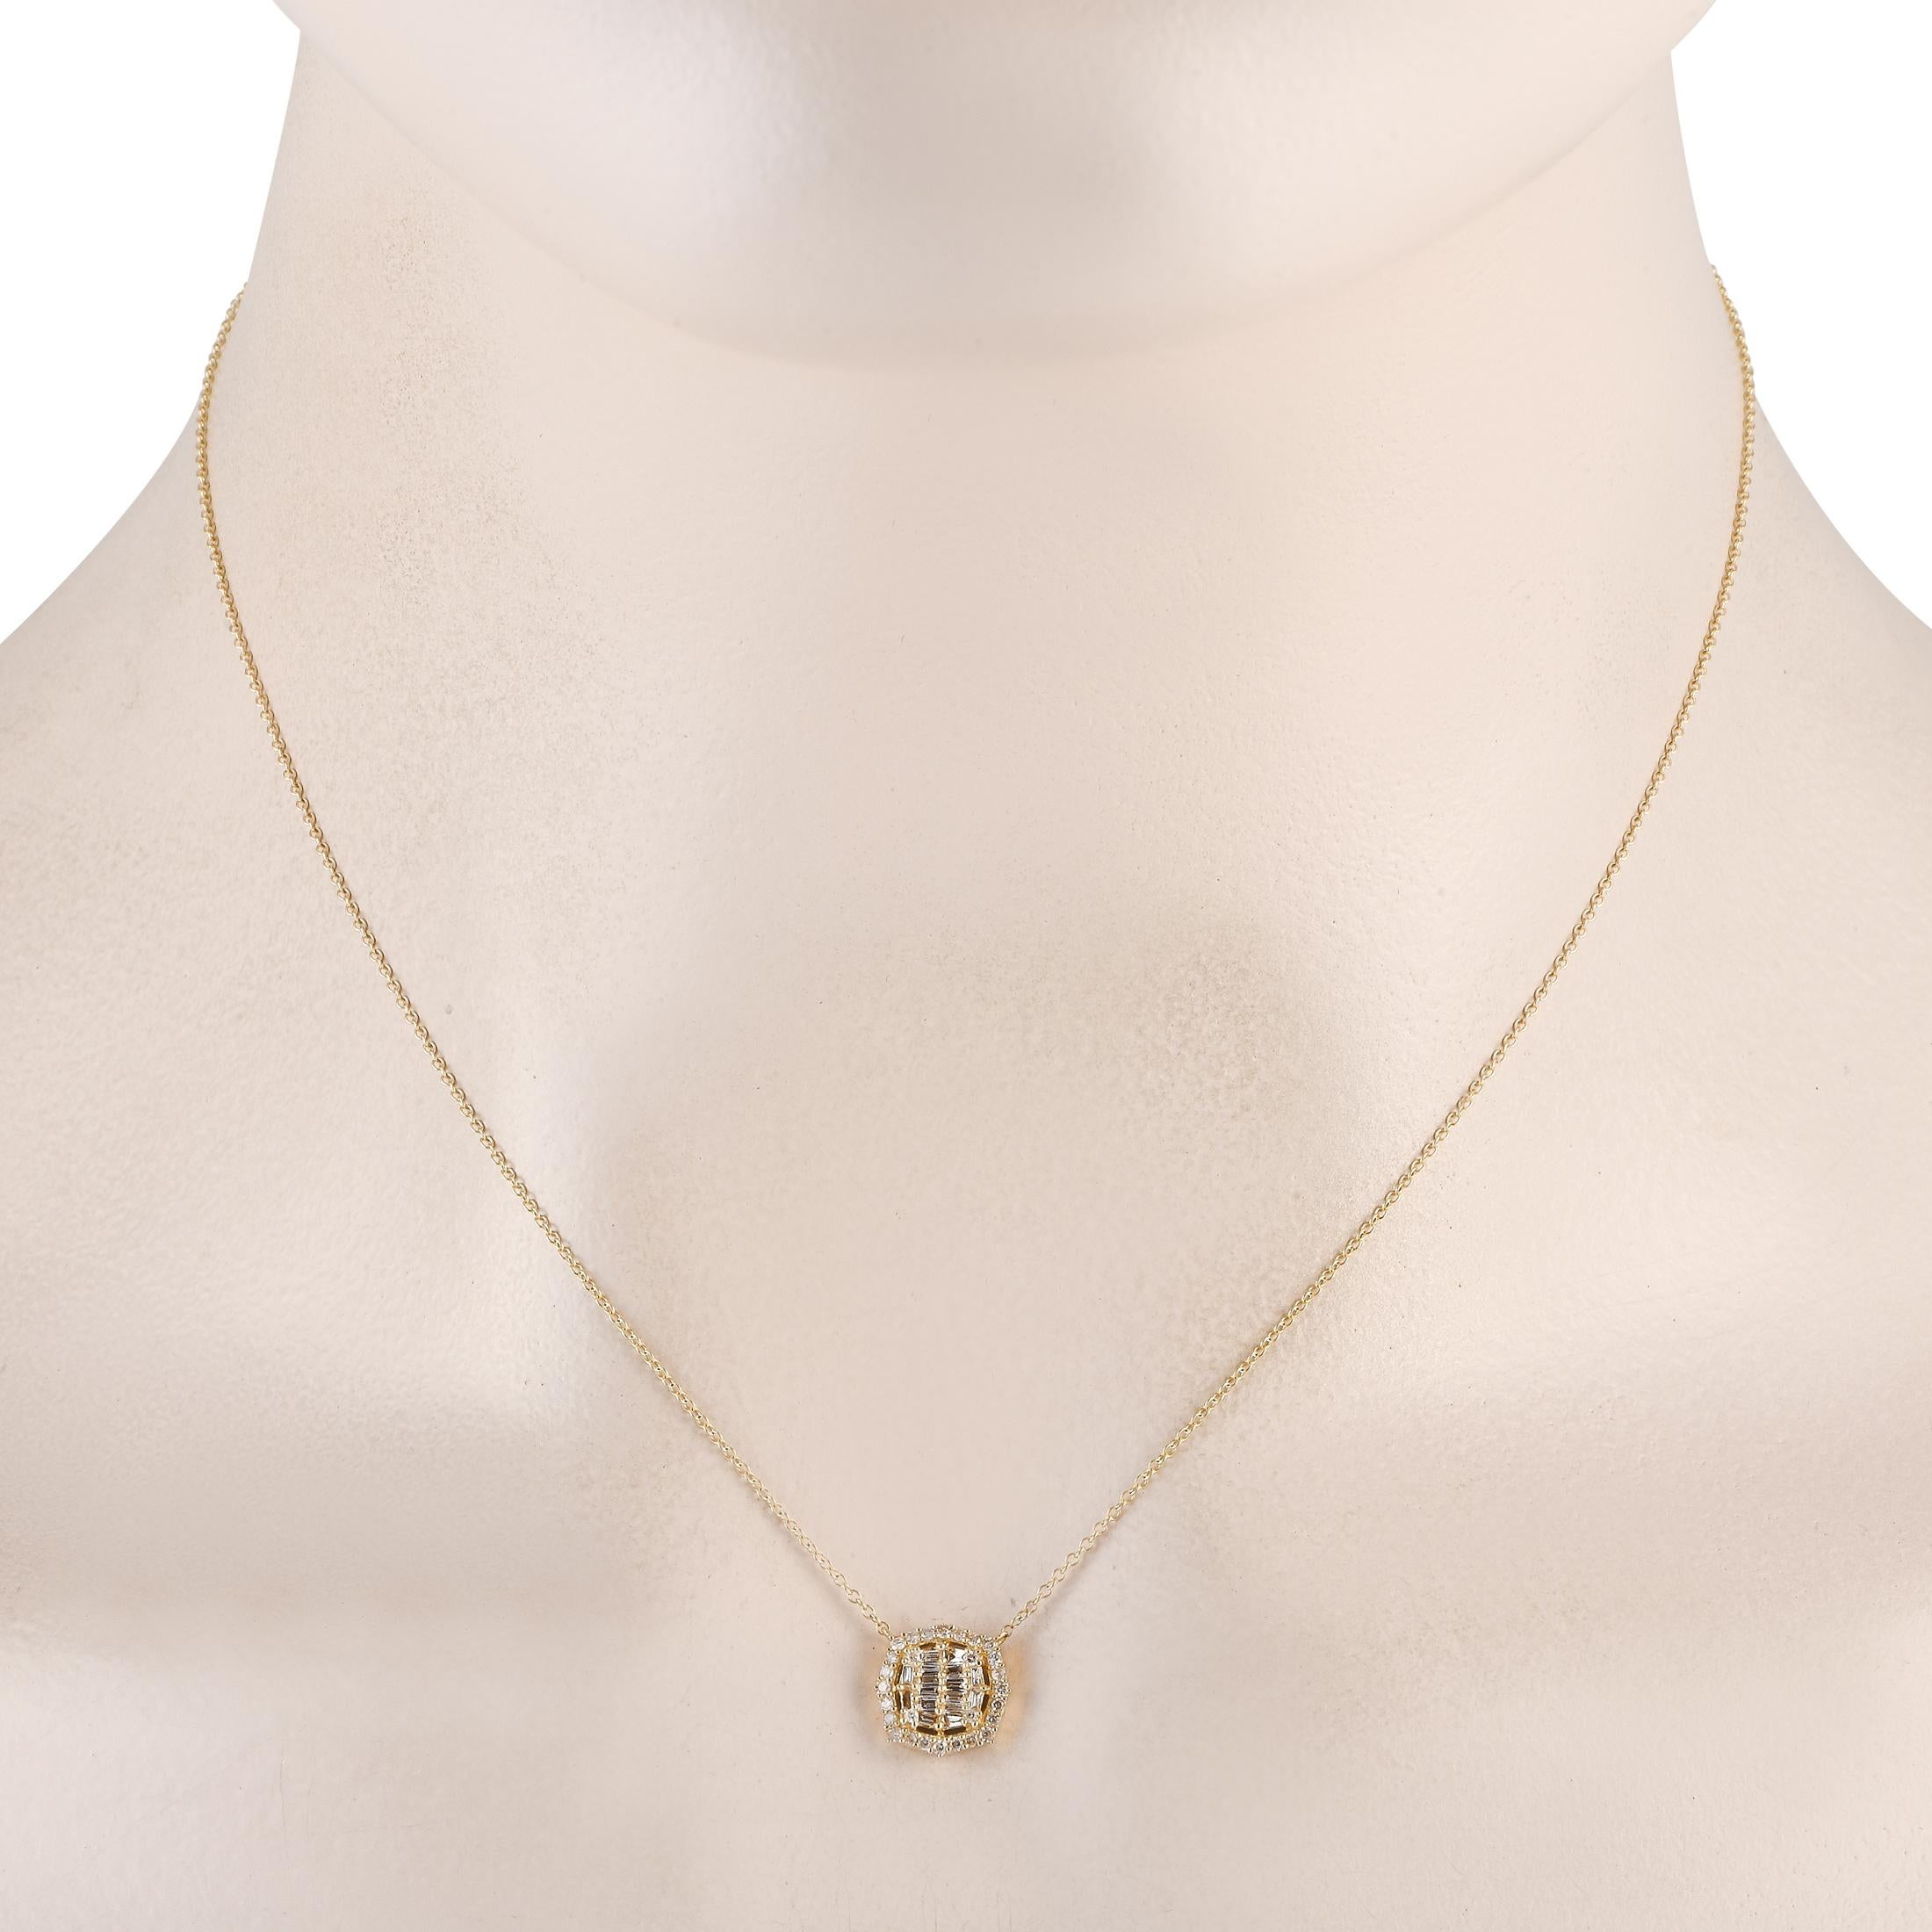 Keep your accessorizing game on point with this 14K yellow gold diamond necklace. It features a cluster of baguette diamonds surrounded by an octagonal frame of round diamonds. The precious stones with icy sparkle are set on shared prongs. The